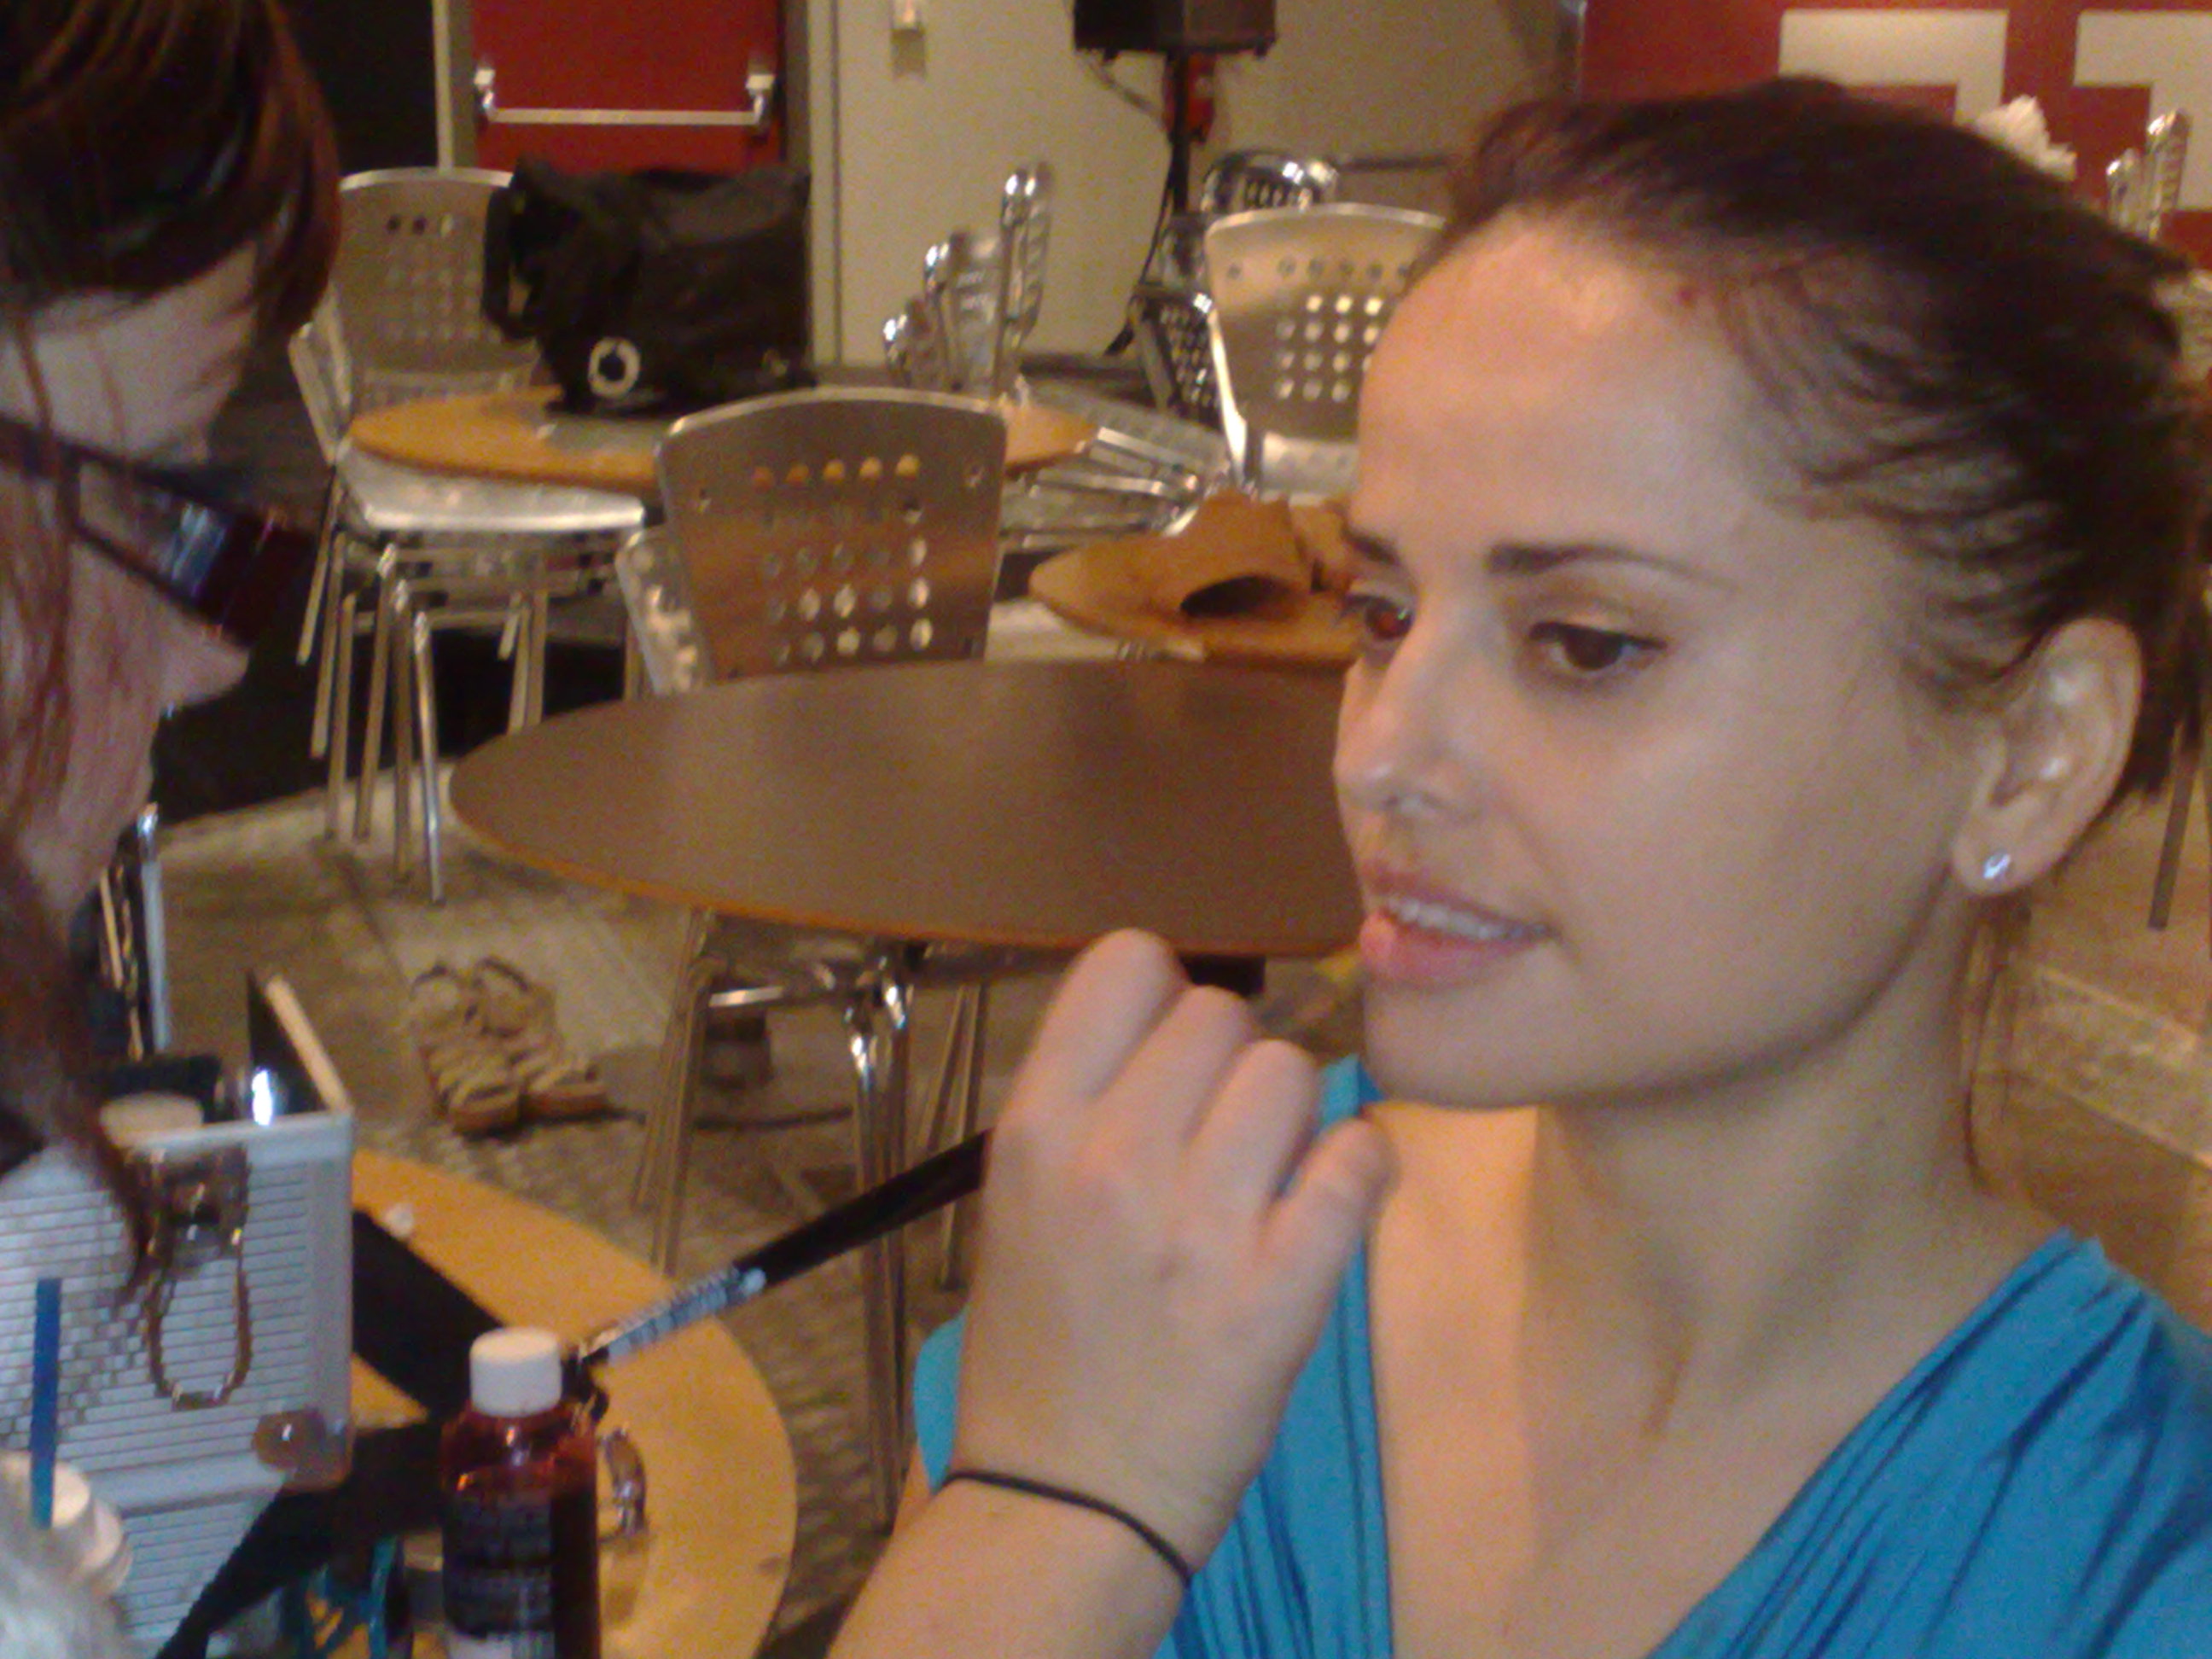 Drea King in makeup before shooting Feature Film.